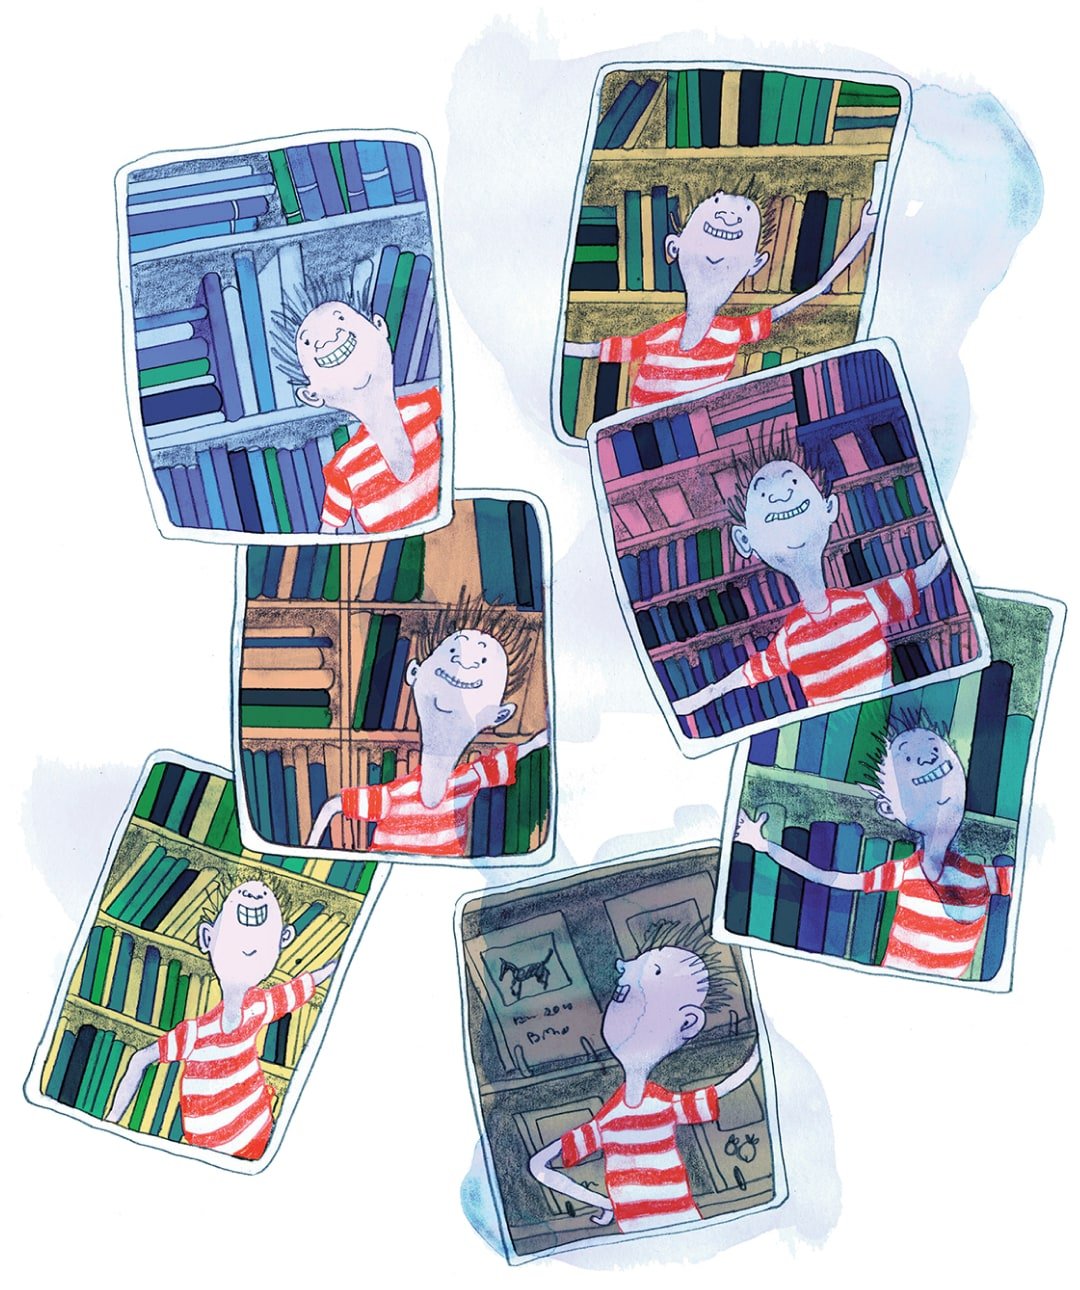 Polaroid style photos of a boy in a red and white striped tshirt are randomly arranged in a pile. In every photo there are books and bookshelves behind him.